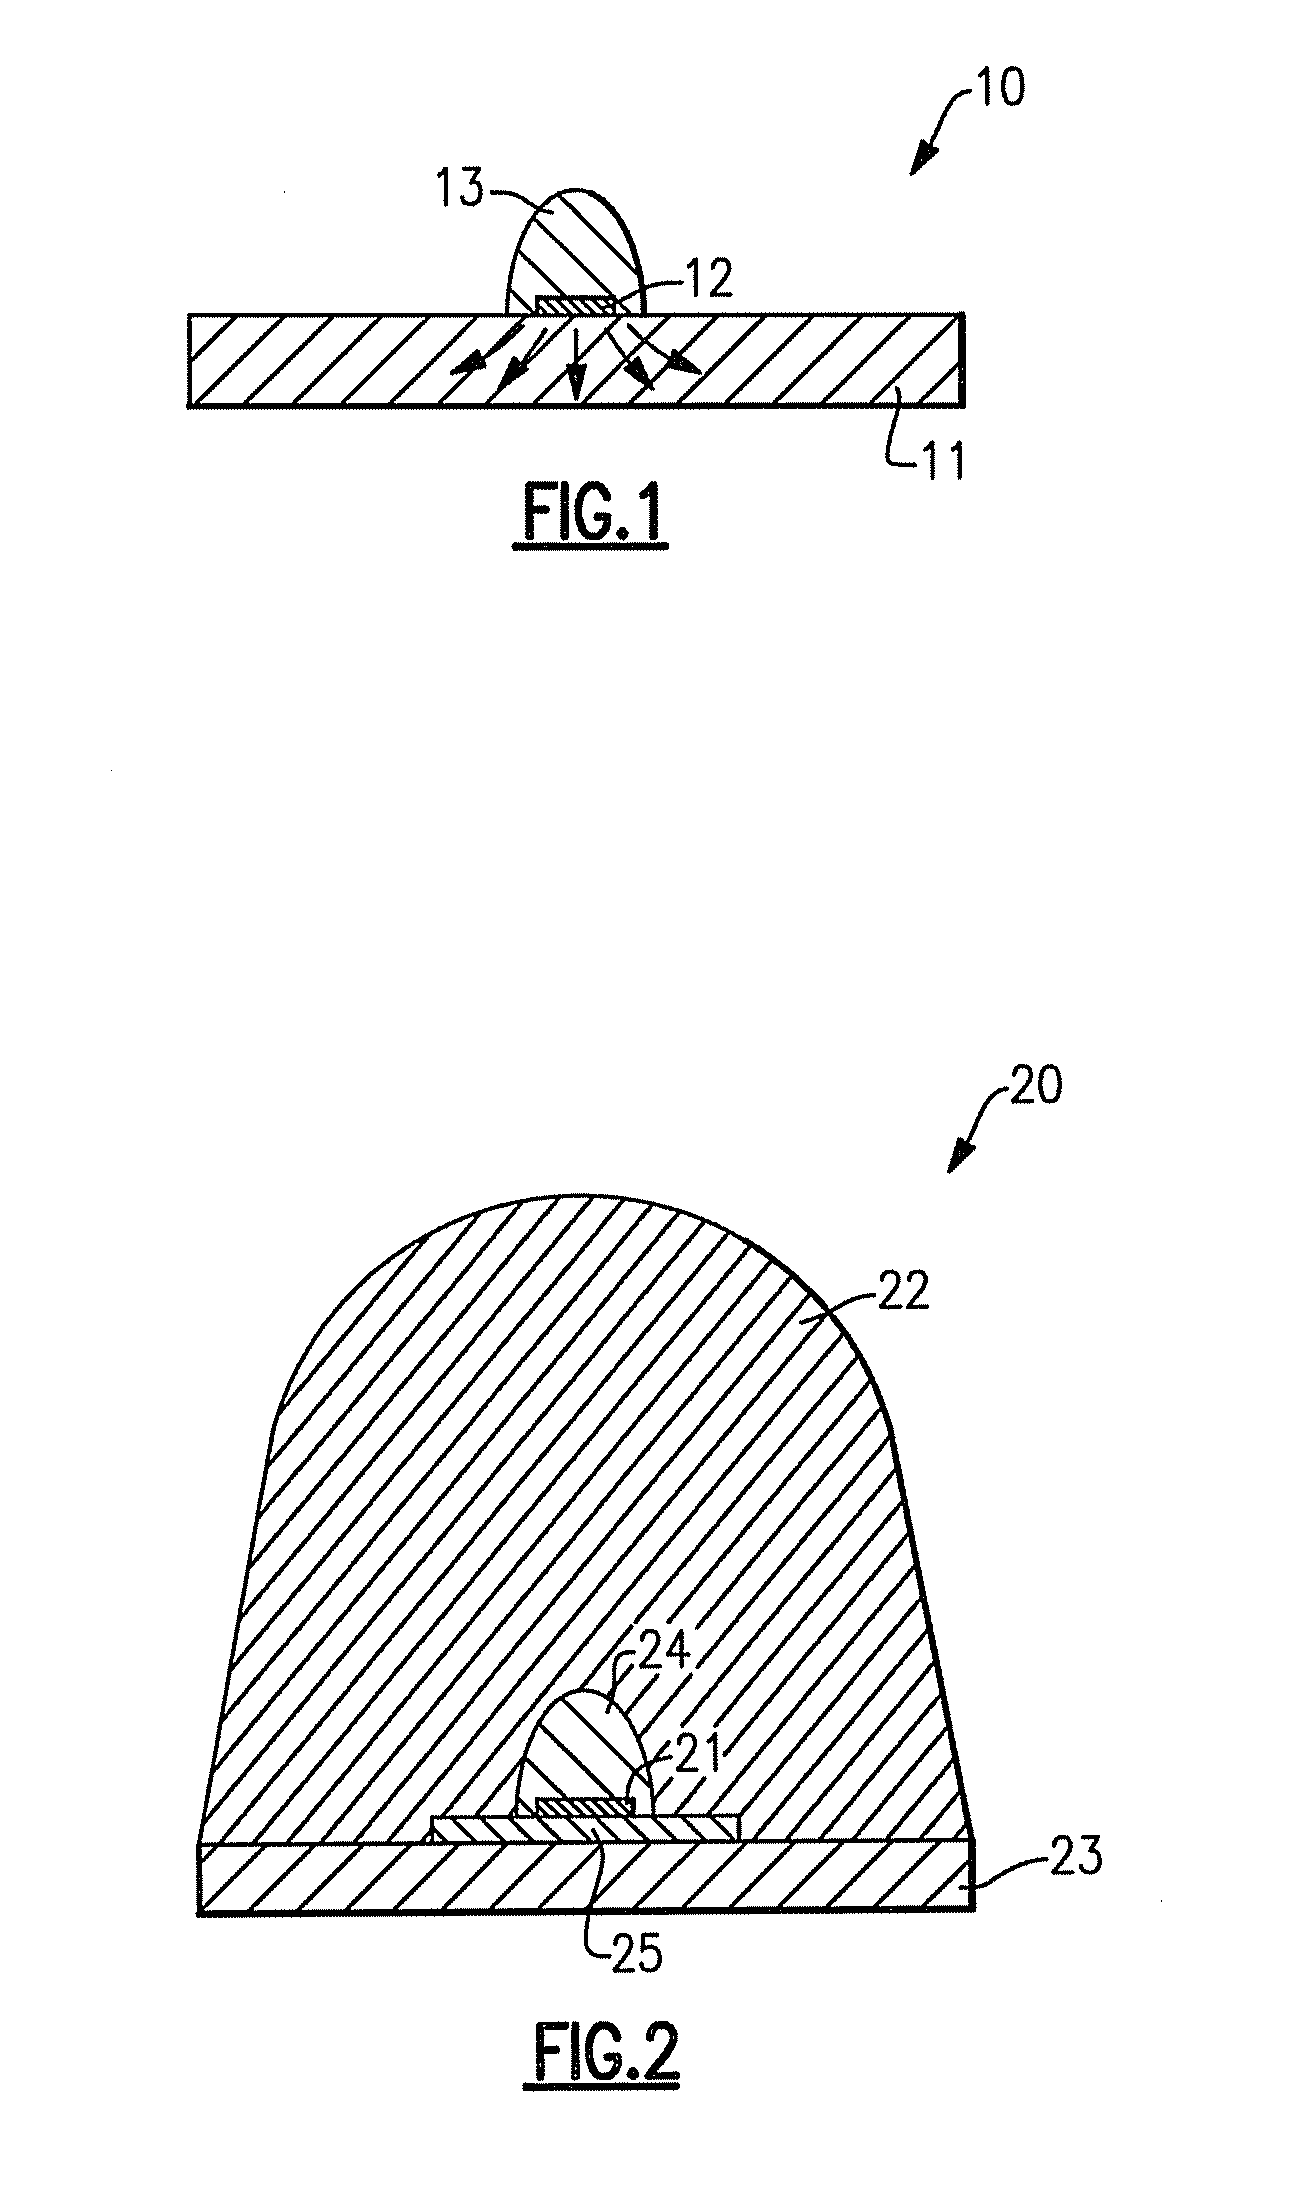 Lighting device which includes one or more solid state light emitting device